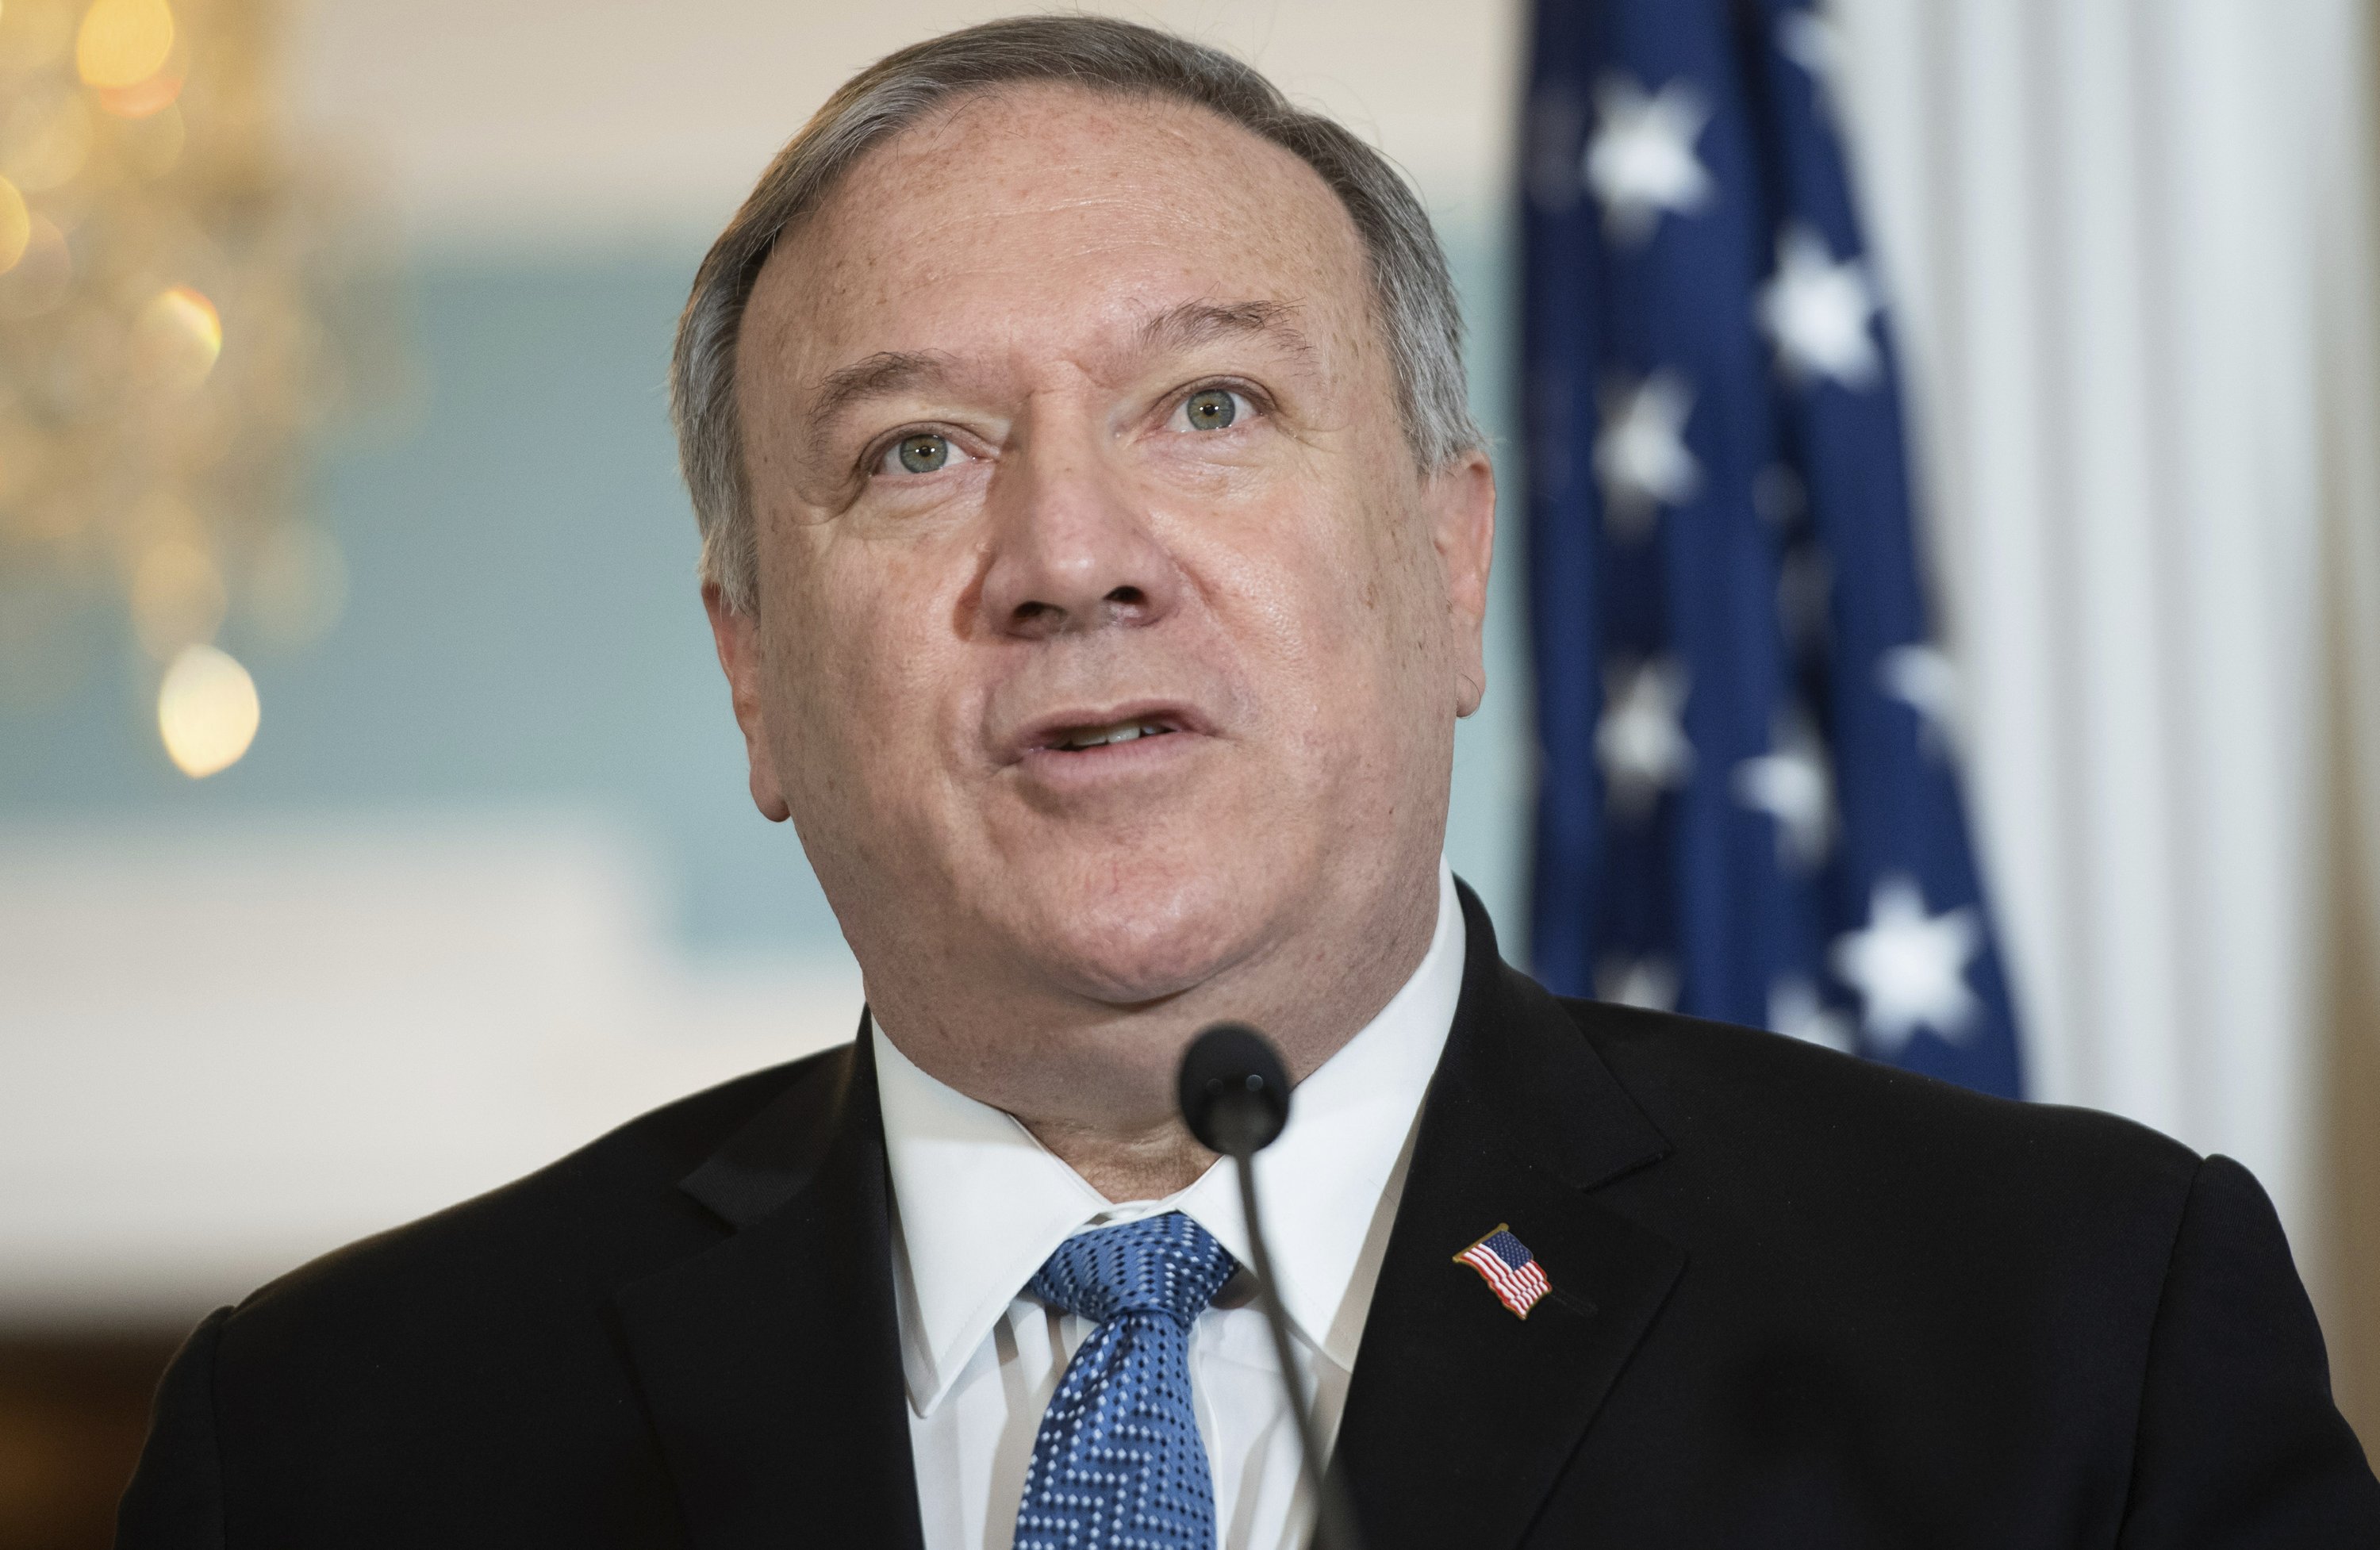 Yemen, China and Cuba occupy a list of tasks at Pompeo as time goes on